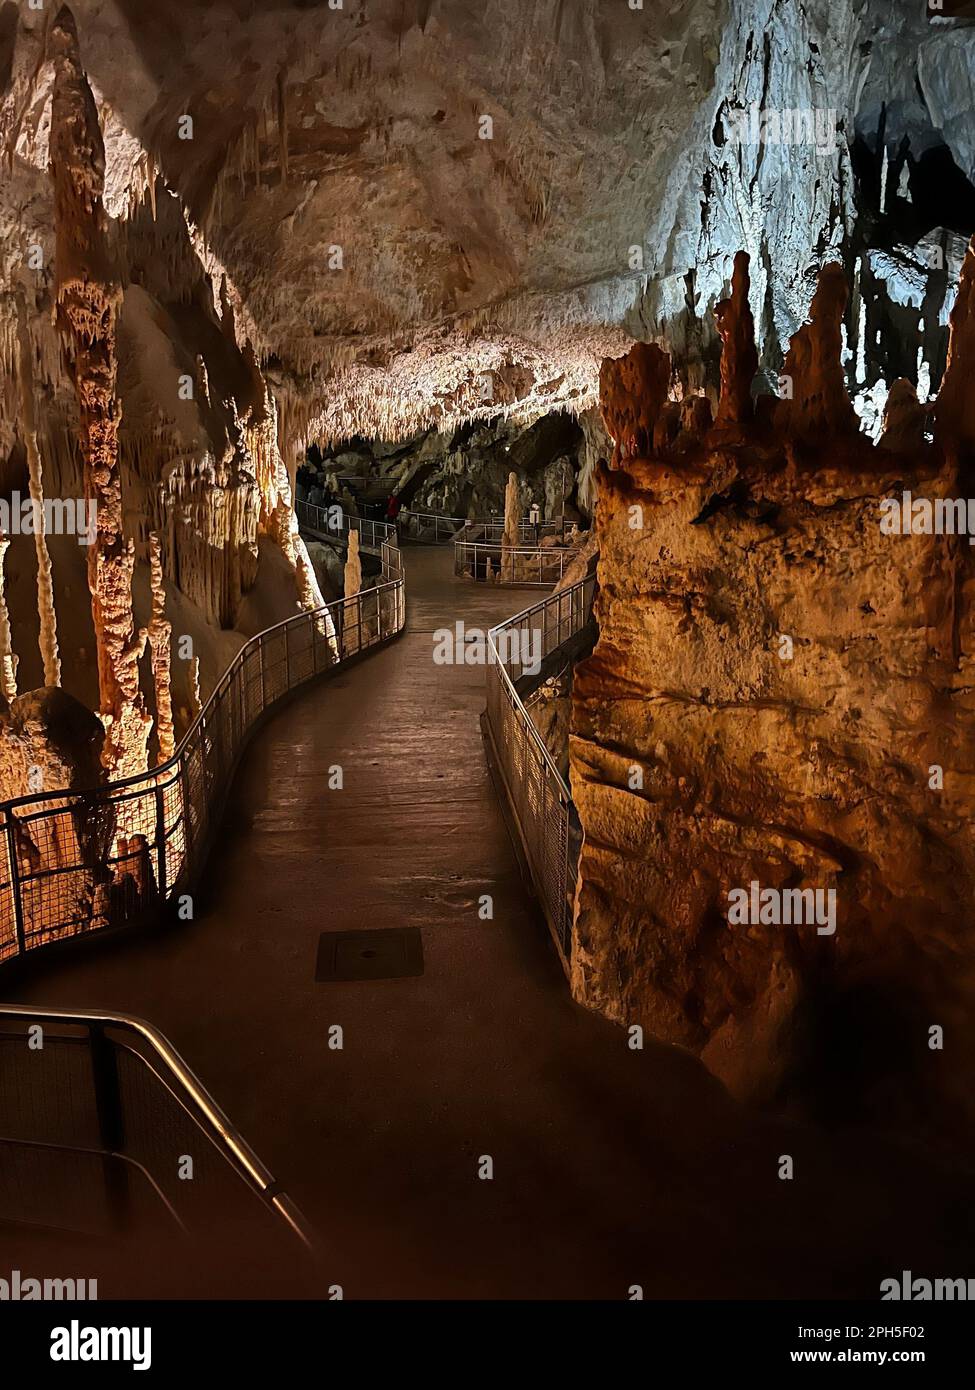 Grotte di Frasassi Karst Cave with Stalactites and Stalagmites in Genga, Marche, Italy. Limestone Formations, Natural Beauty Landscape Stock Photo